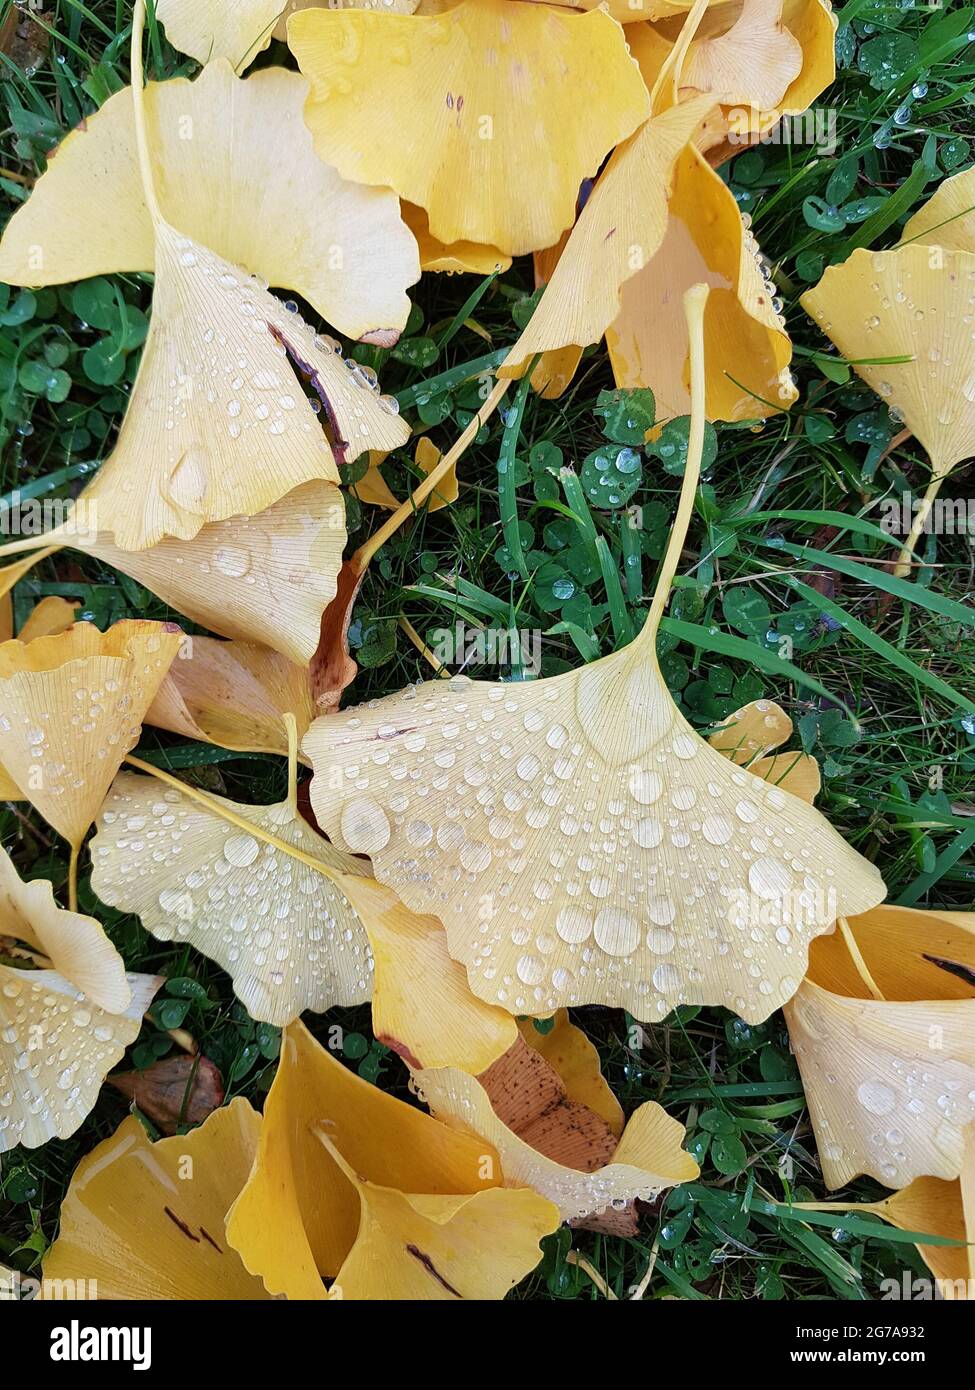 Ginkgo leaves in the grass with raindrops Stock Photo